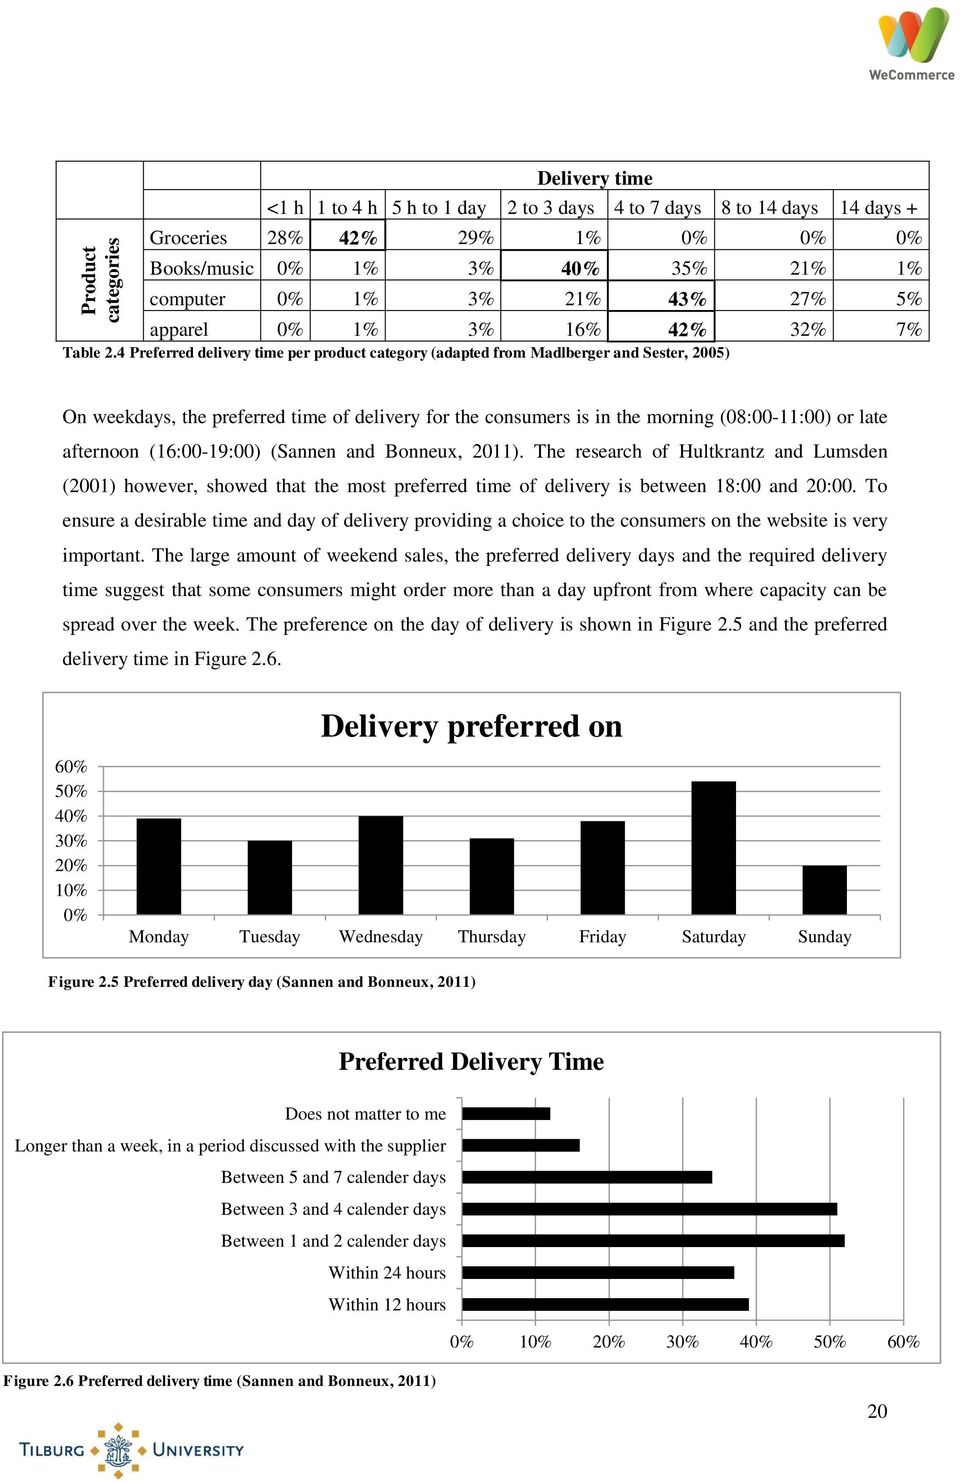 4 Preferred delivery time per product category (adapted from Madlberger and Sester, 2005) On weekdays, the preferred time of delivery for the consumers is in the morning (08:00-11:00) or late